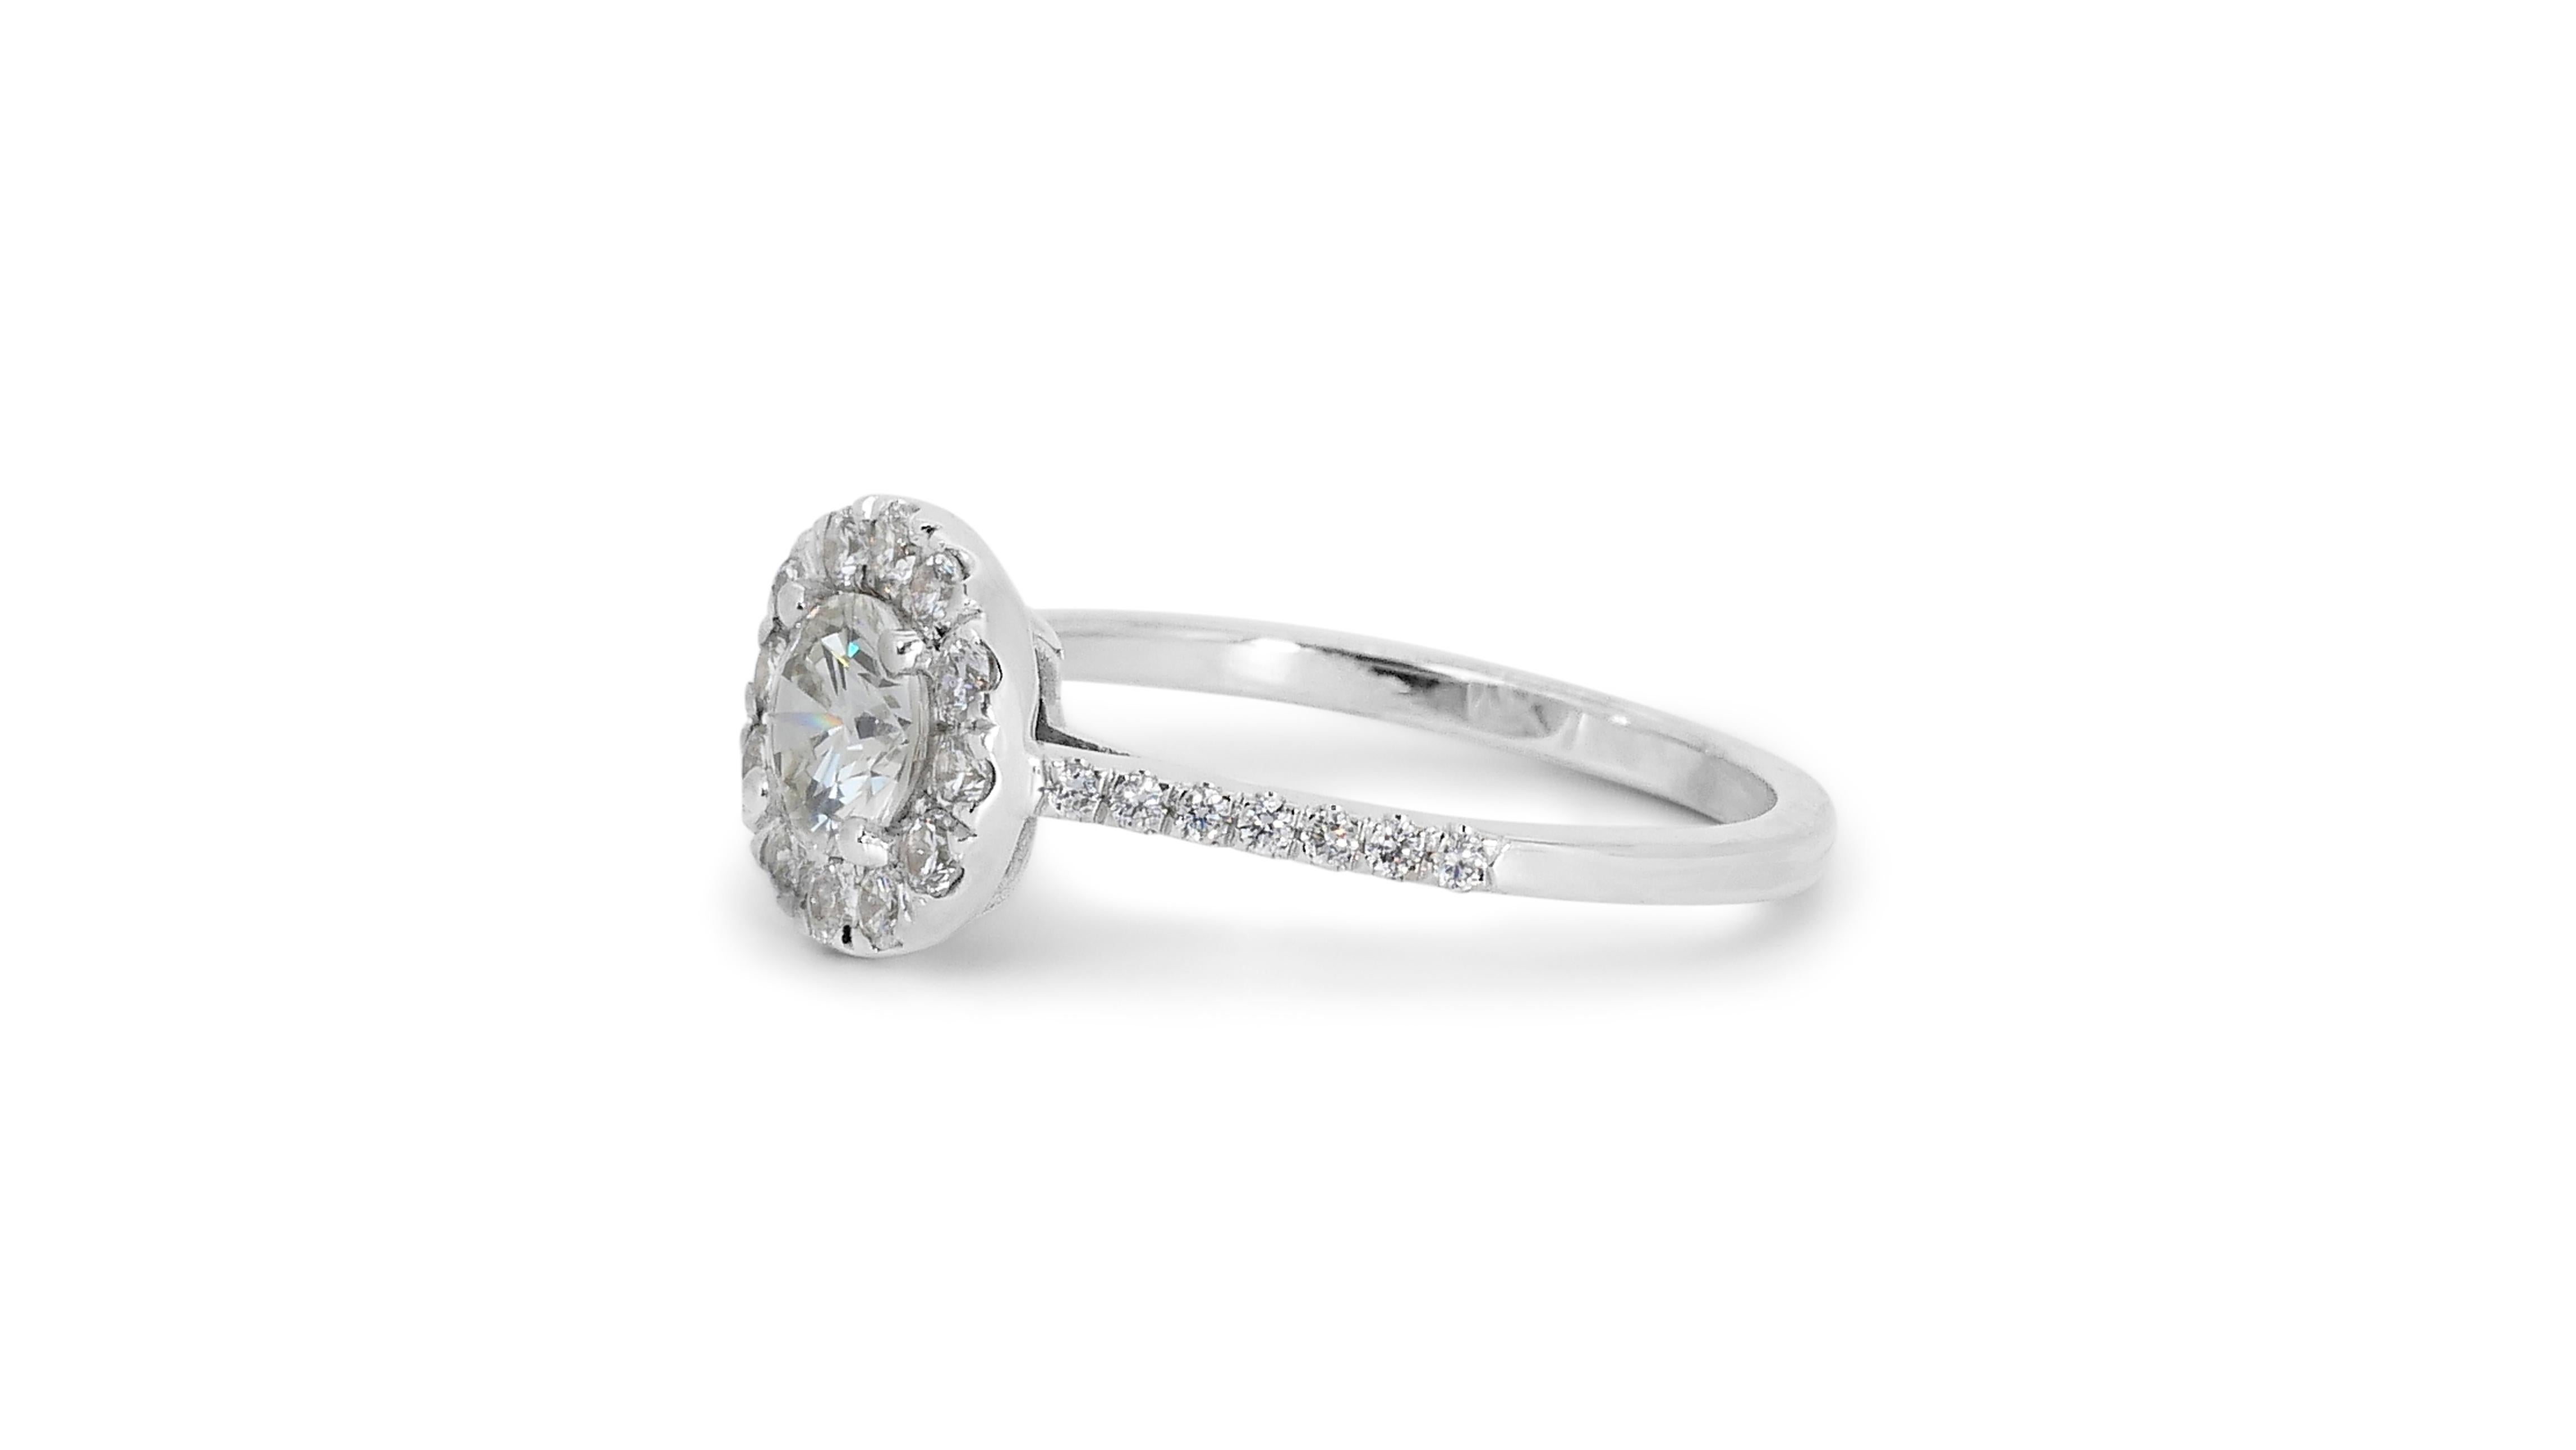 Round Cut Stunning 1.35ct Diamond Halo Ring in 18k White Gold - GIA Certified For Sale